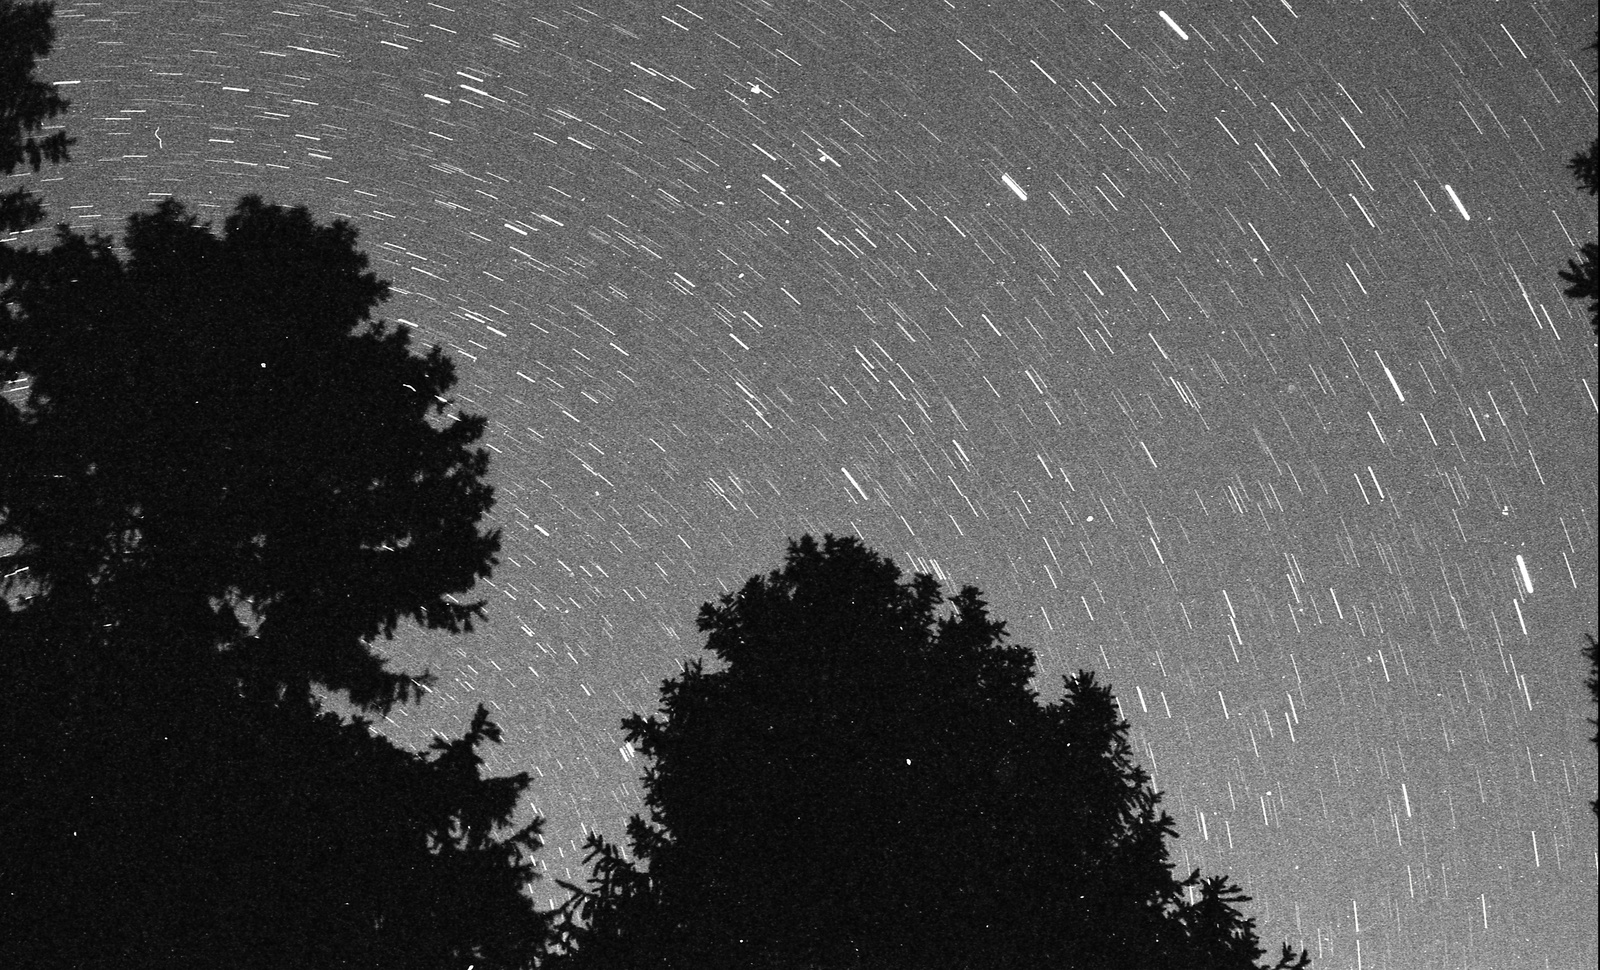 Photograph tracking the movement of the stars as the earth rotates, leaving trails where the stars once were. Black and white,